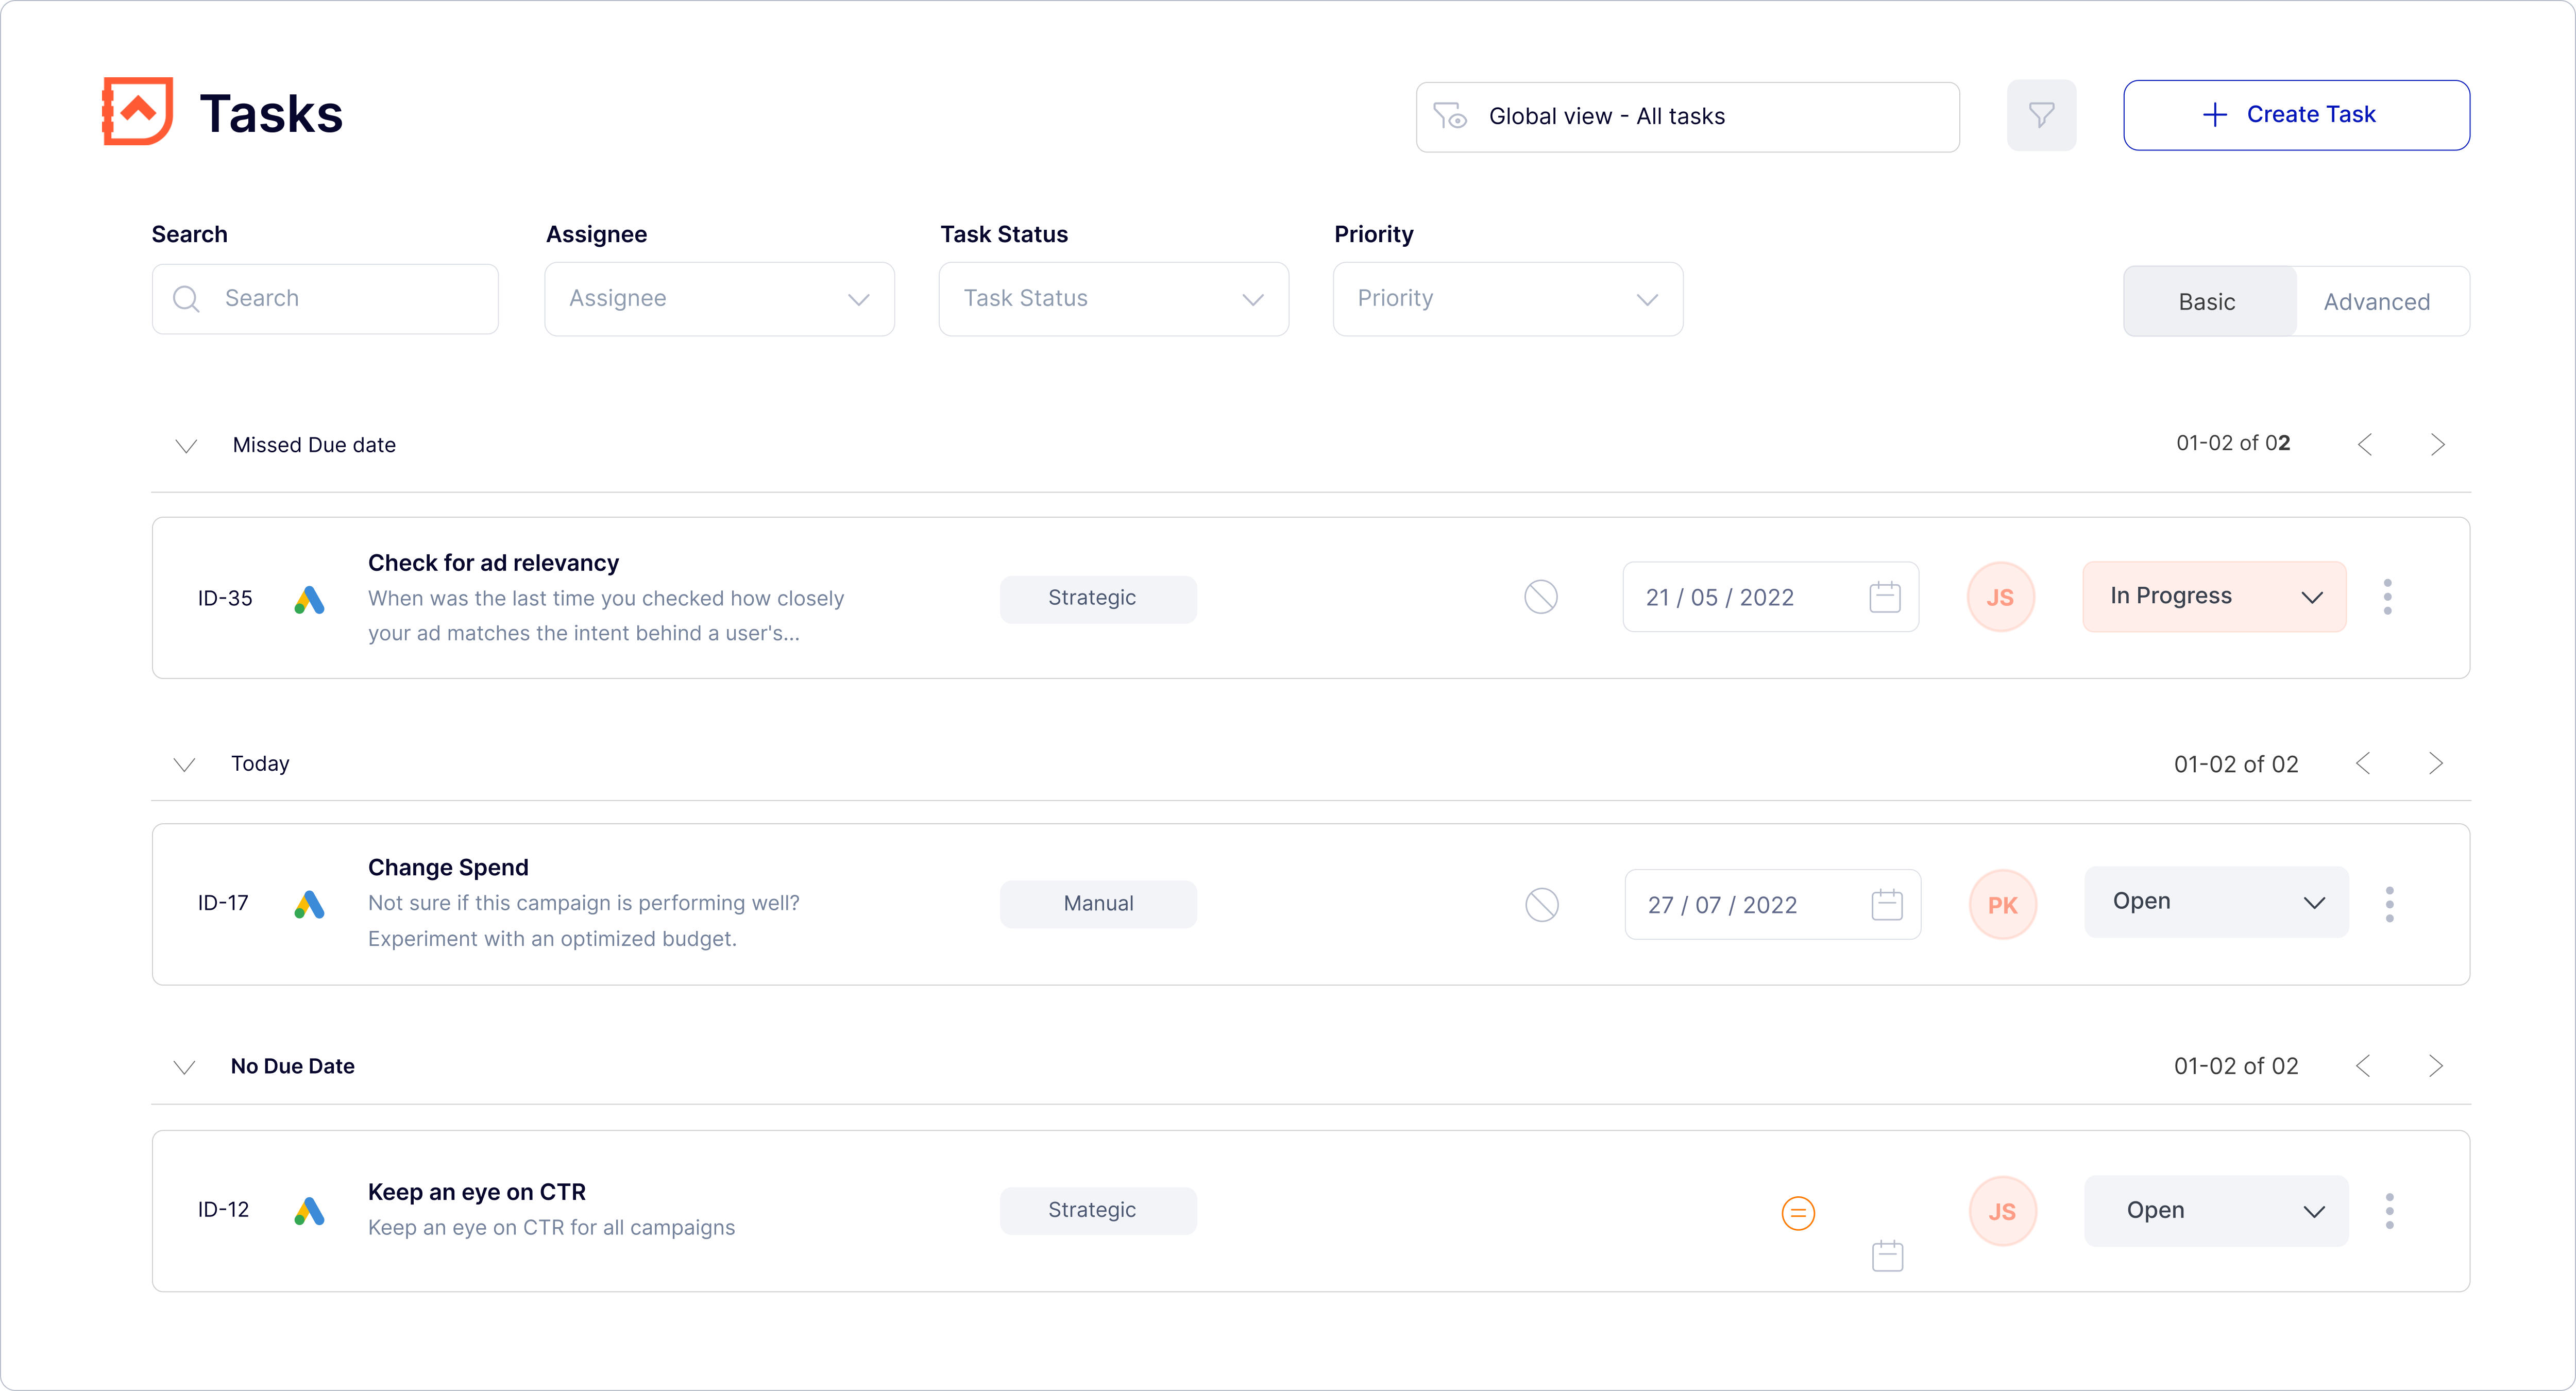 Elevate your marketing game by connecting data to task management, adding context to tasks, and prioritizing what matters most, all in one platform.